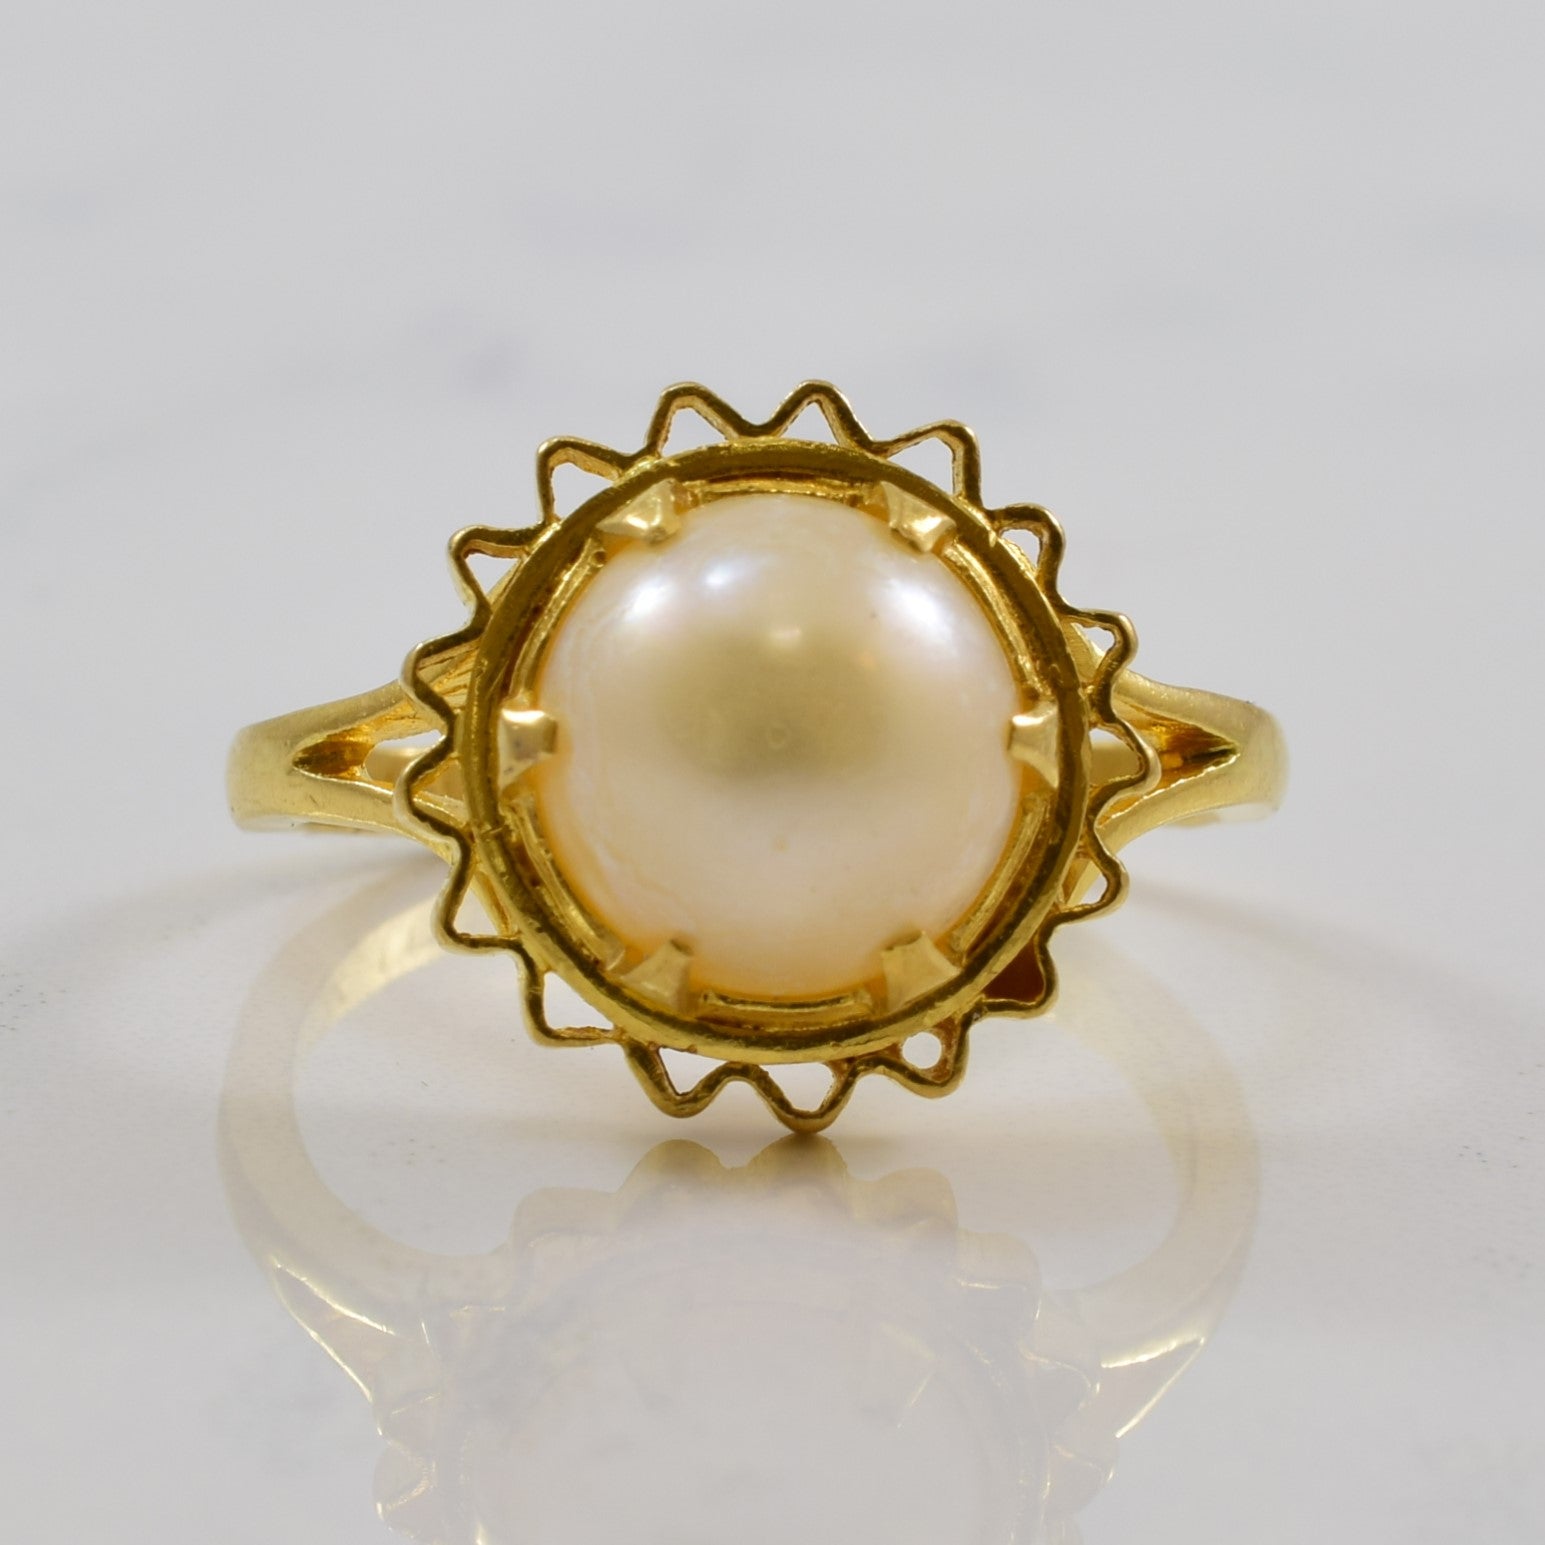 Wavy Halo Pearl Cocktail Ring | 4.34ct | SZ 8.25 |